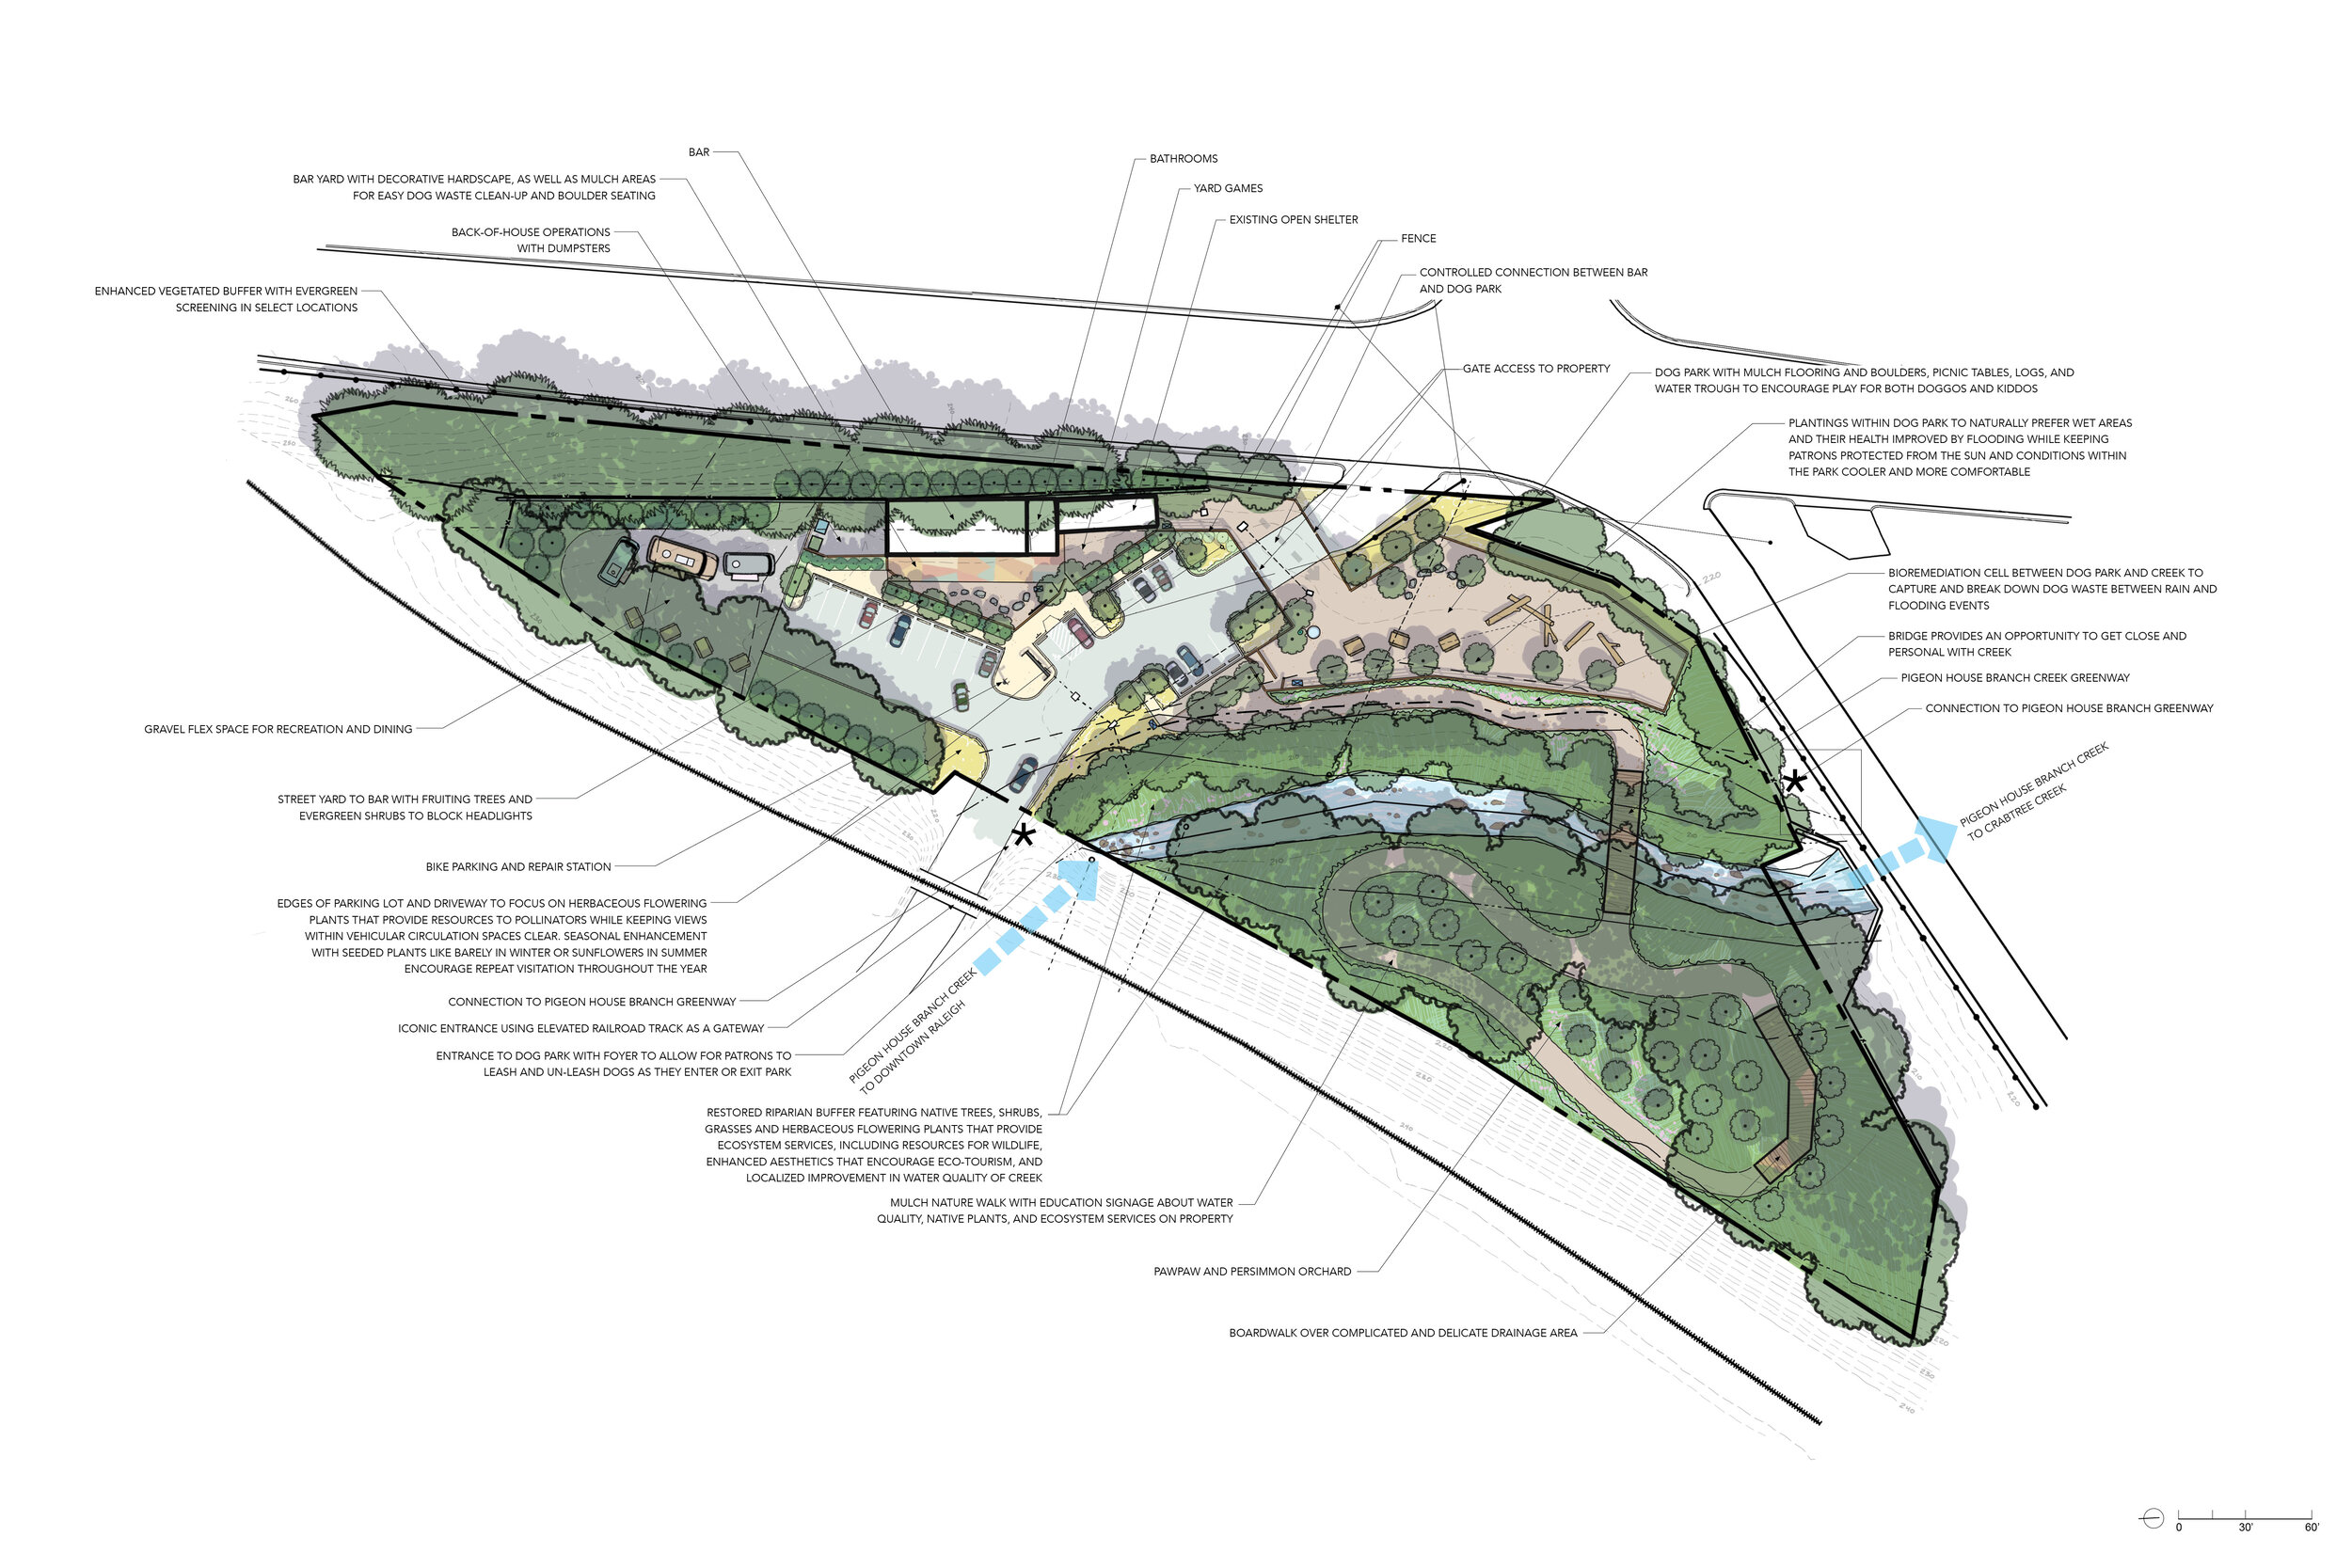  Schematic design for use in marketing the dog park and instigating interest in daylighting Pigeon House Branch Creek for the purposes of eco-tourism in downtown Raleigh, NC.  